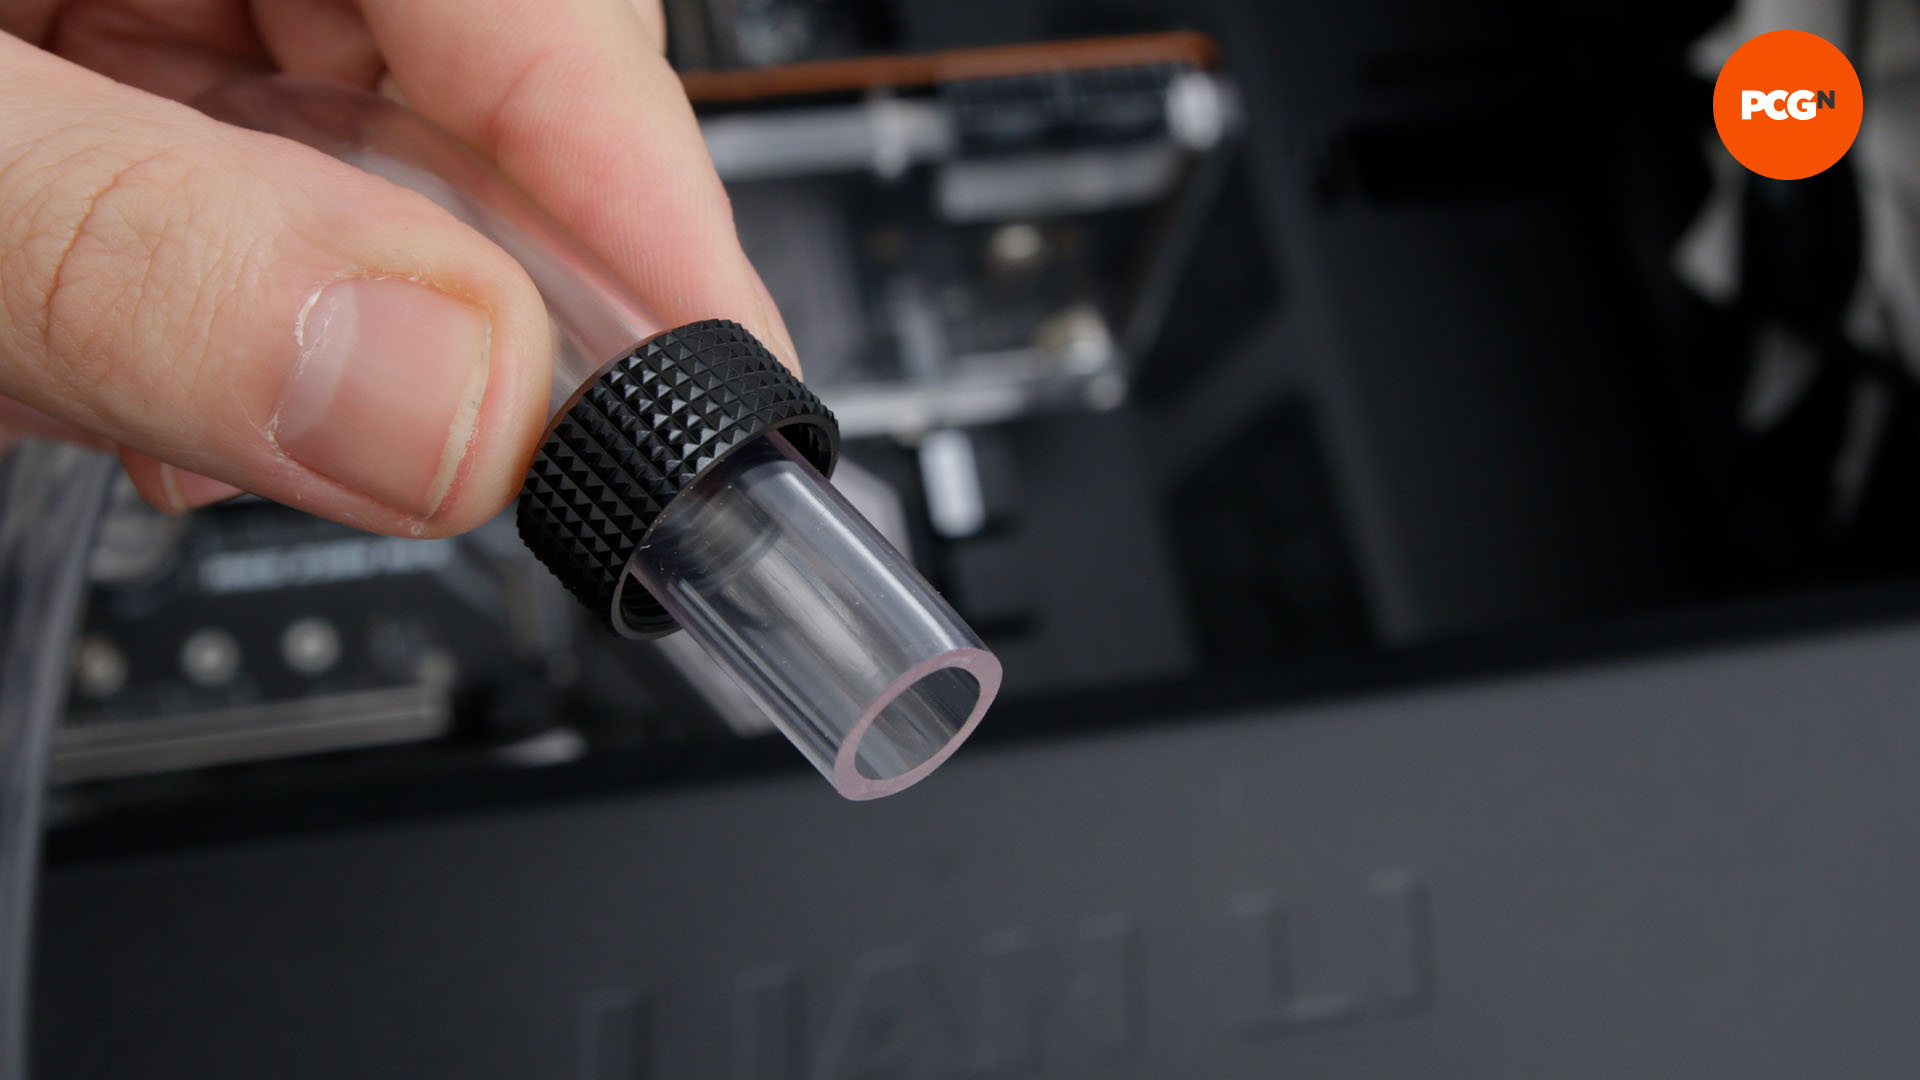 How to water cool your PC: install locking ring on tubing